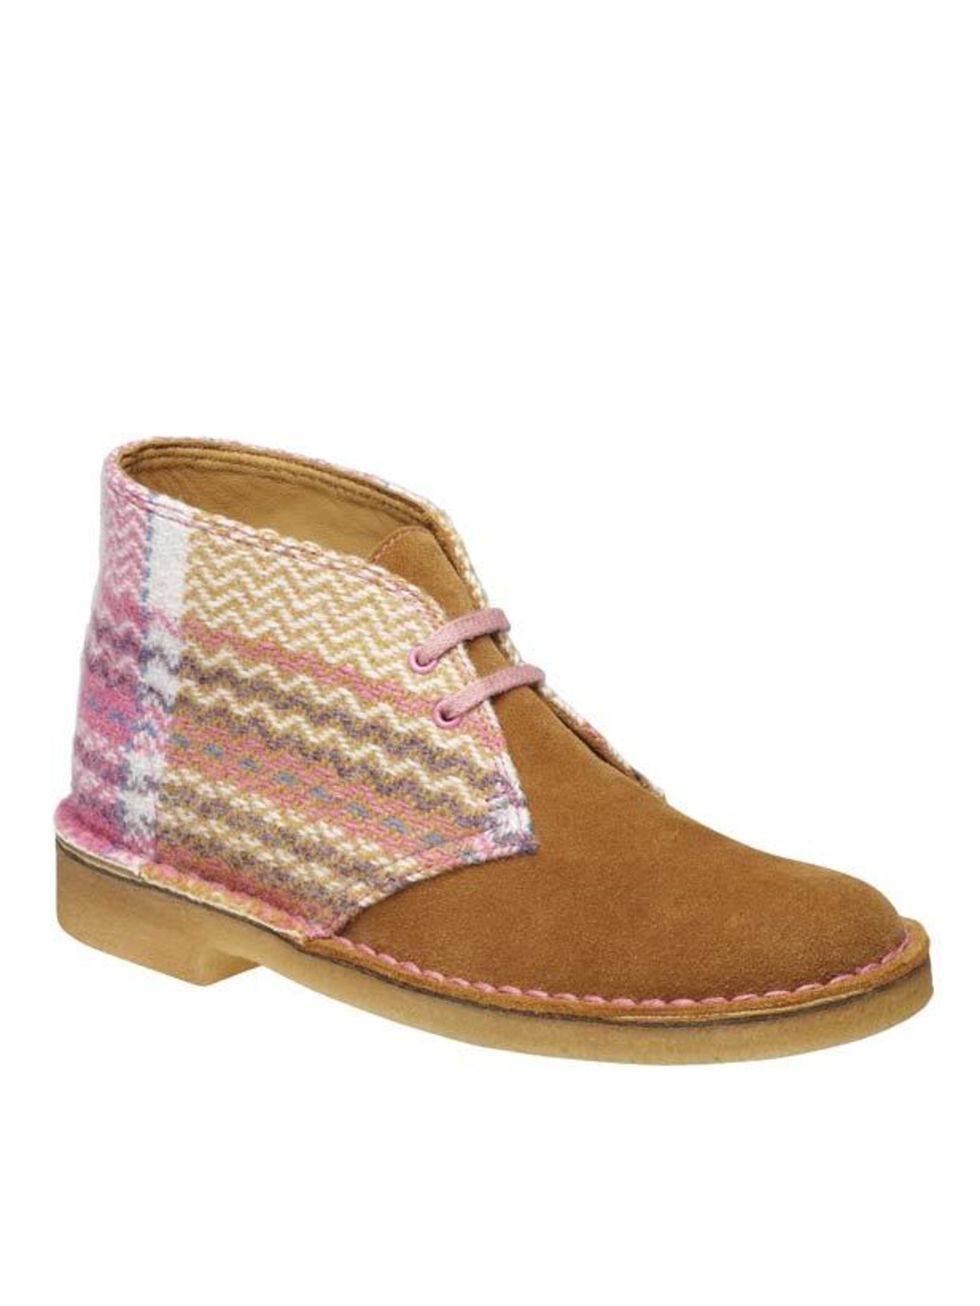 <p>Looking for an easy way to tap into the artisan textile trend? Then Clarks update of the classic desert boot complete with 1930s Welsh blanket detailing is just the ticket<a href="http://www.clarks.co.uk/find/keyword-is-desert+boots/product-is-203471